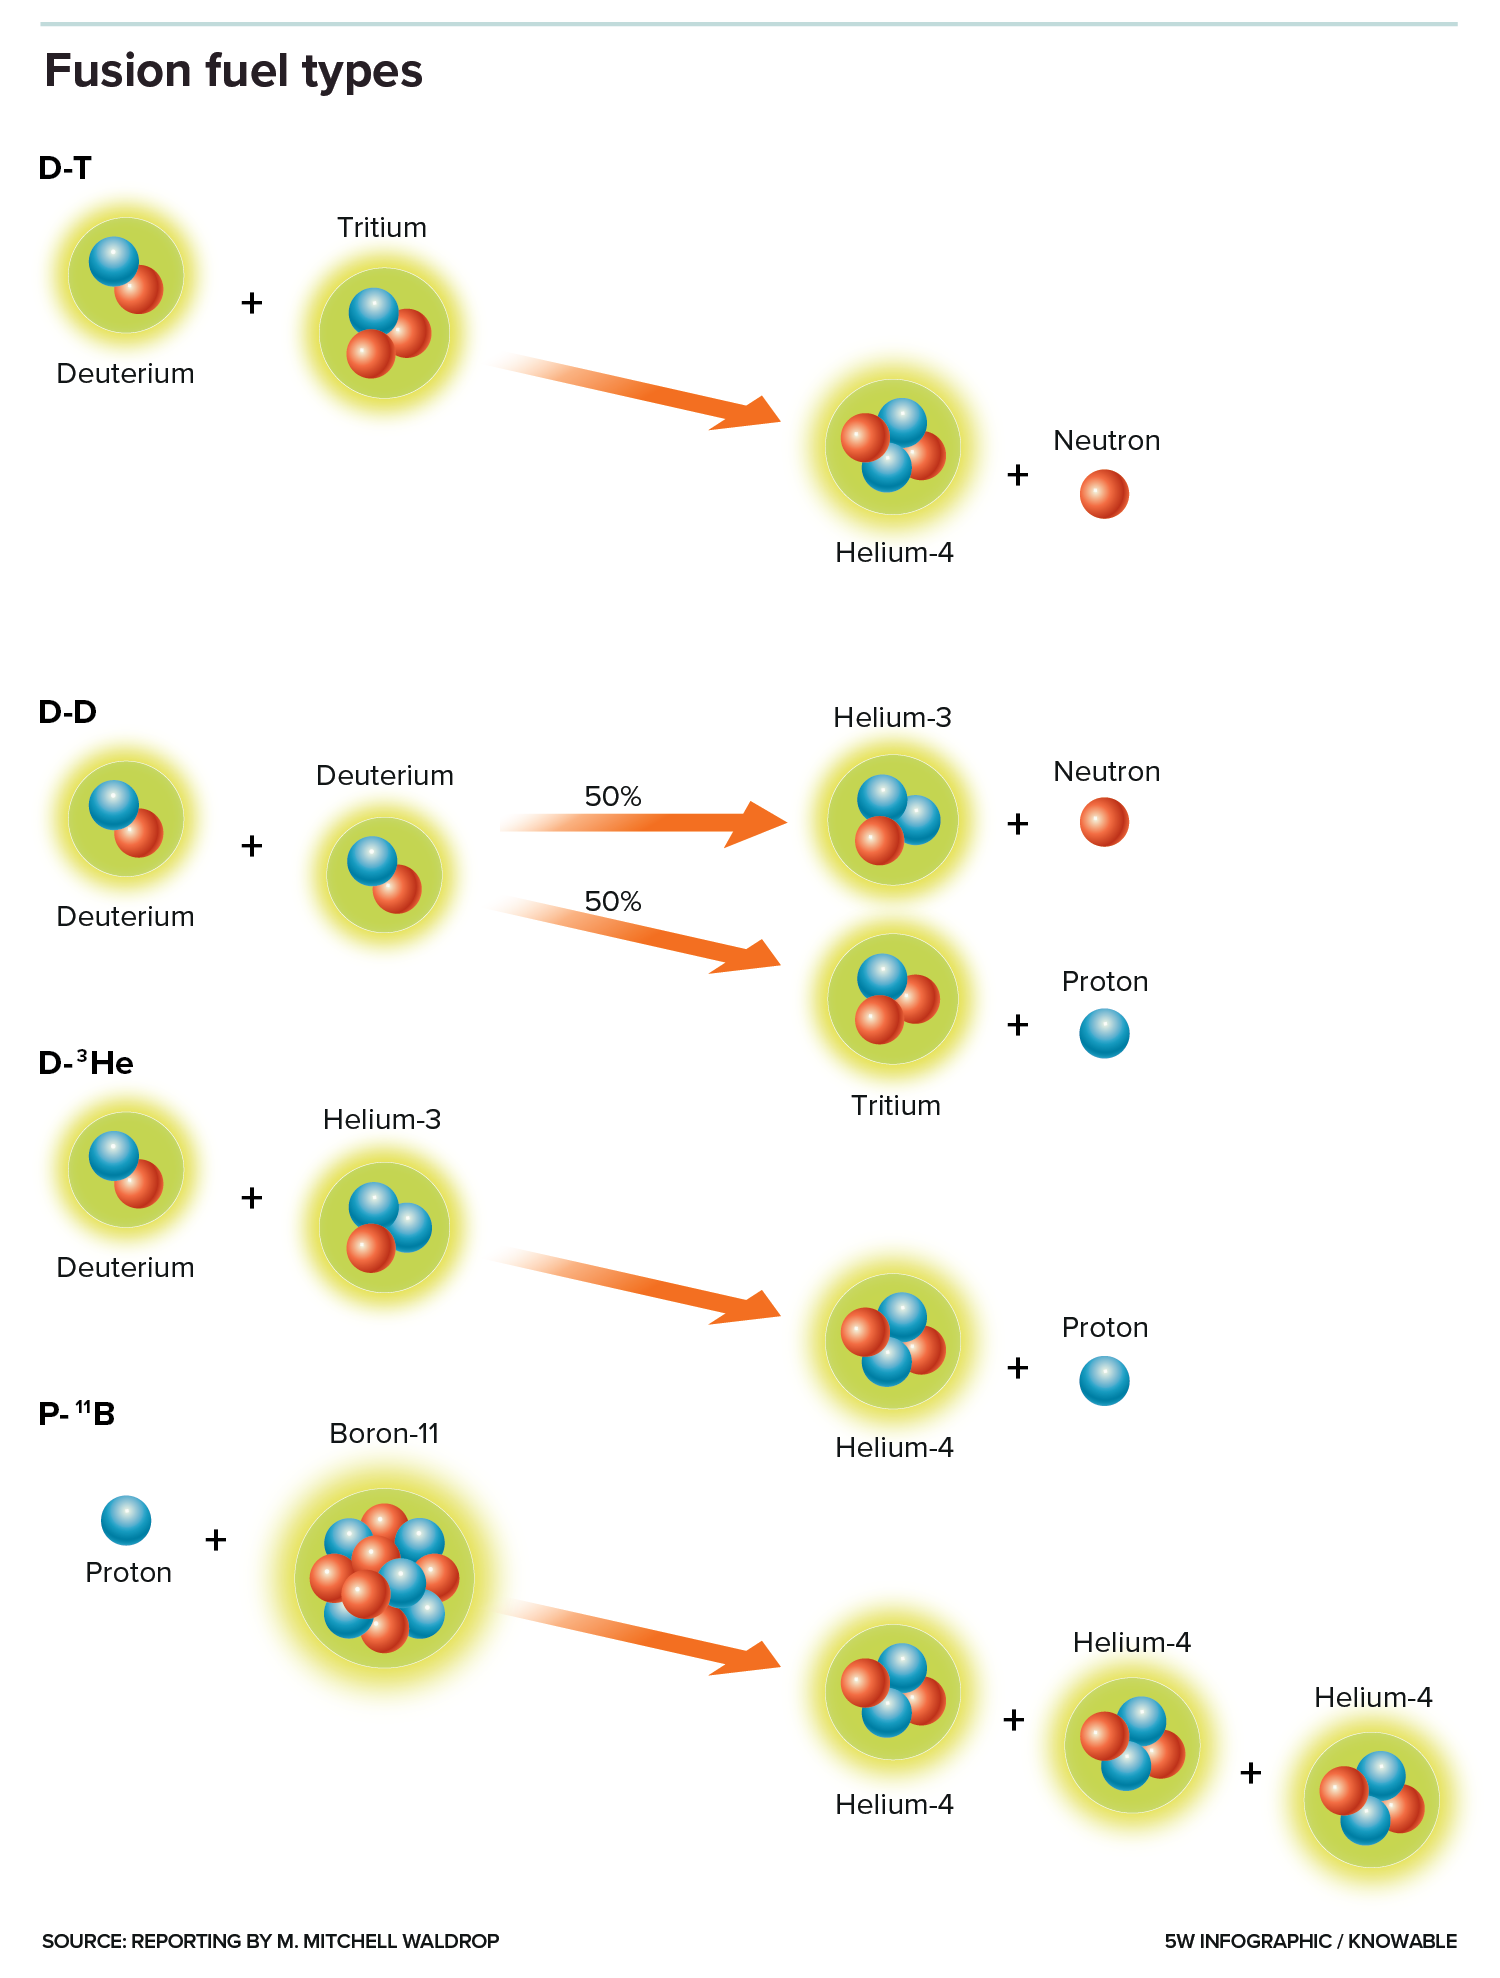 Graphic shows the light isotopes of four promising types of fusion fuel and their fusion products.